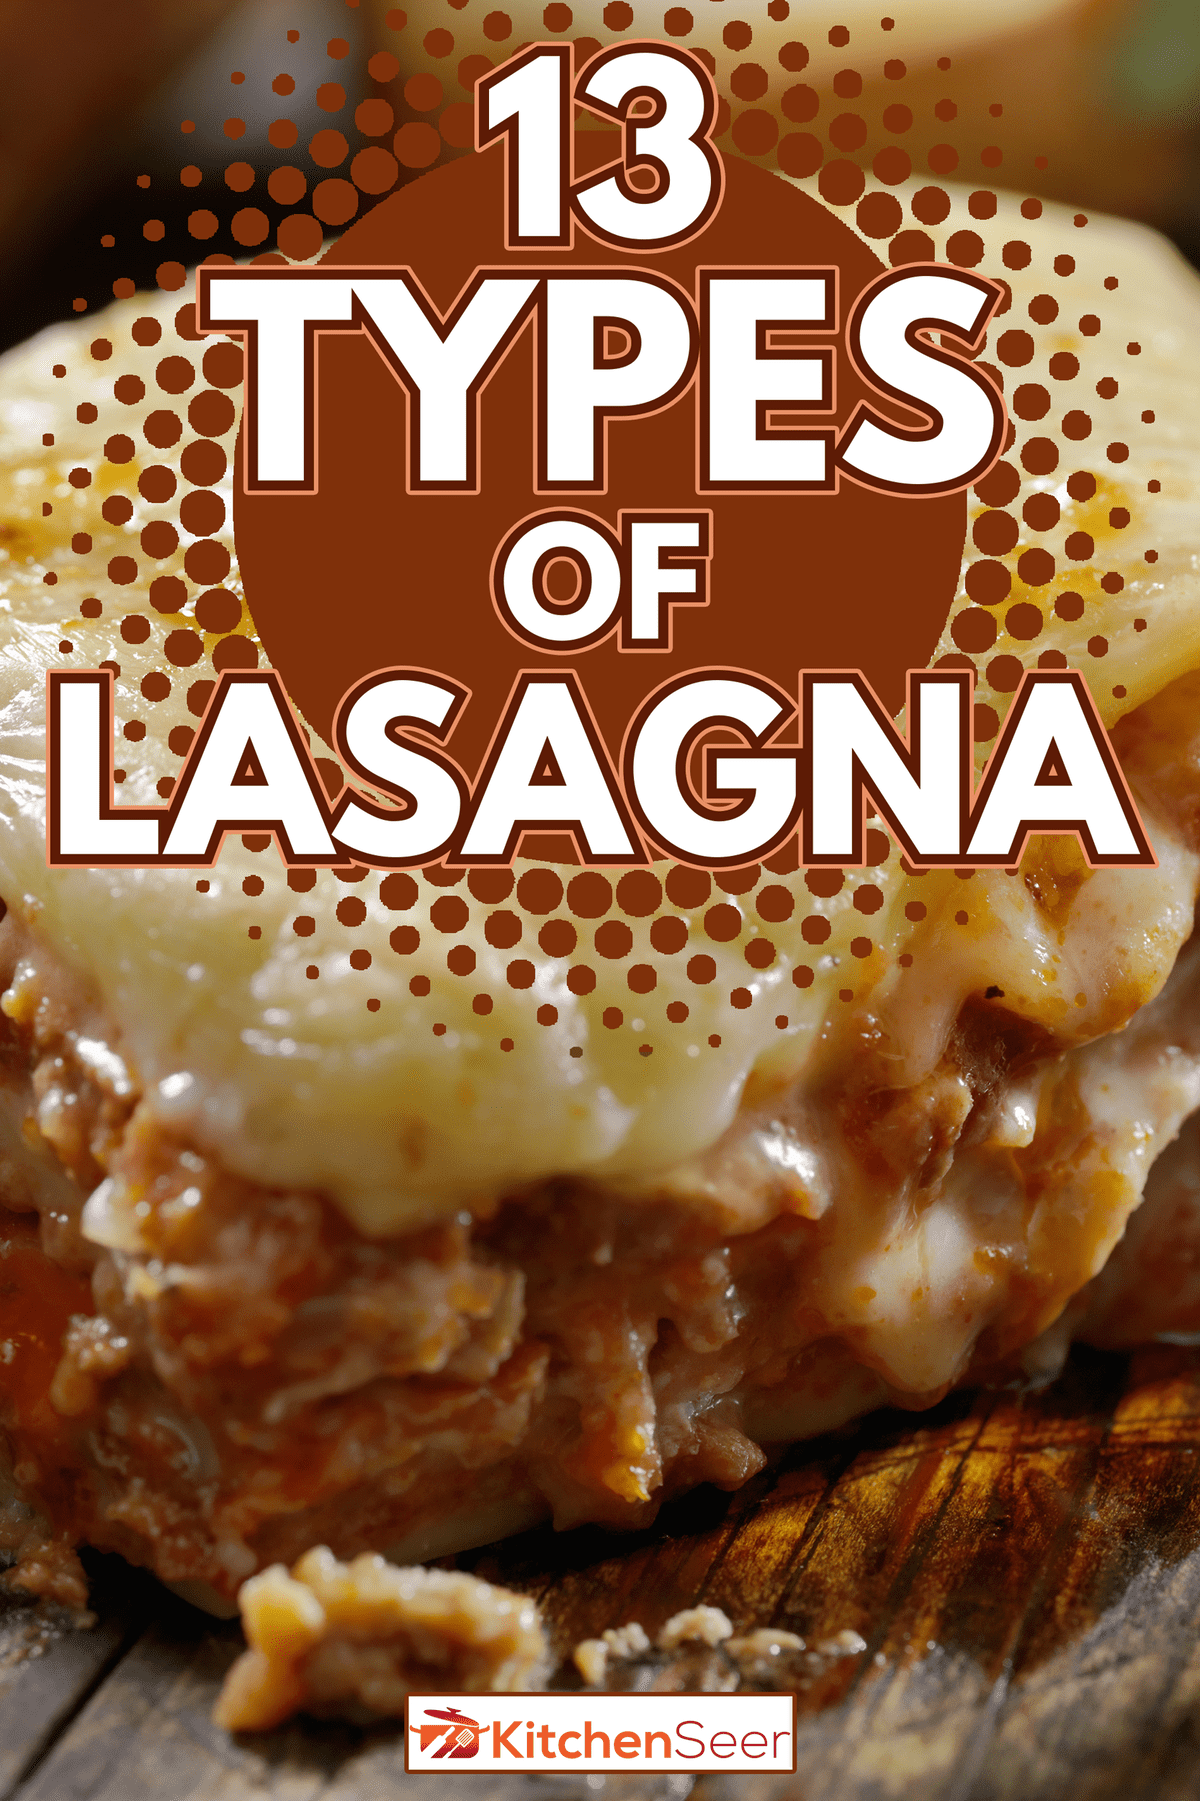 Cheesy, Beef and Veal Lasagna with a bechamel sauce and ricotta cheese - 13 Types of Lasagna